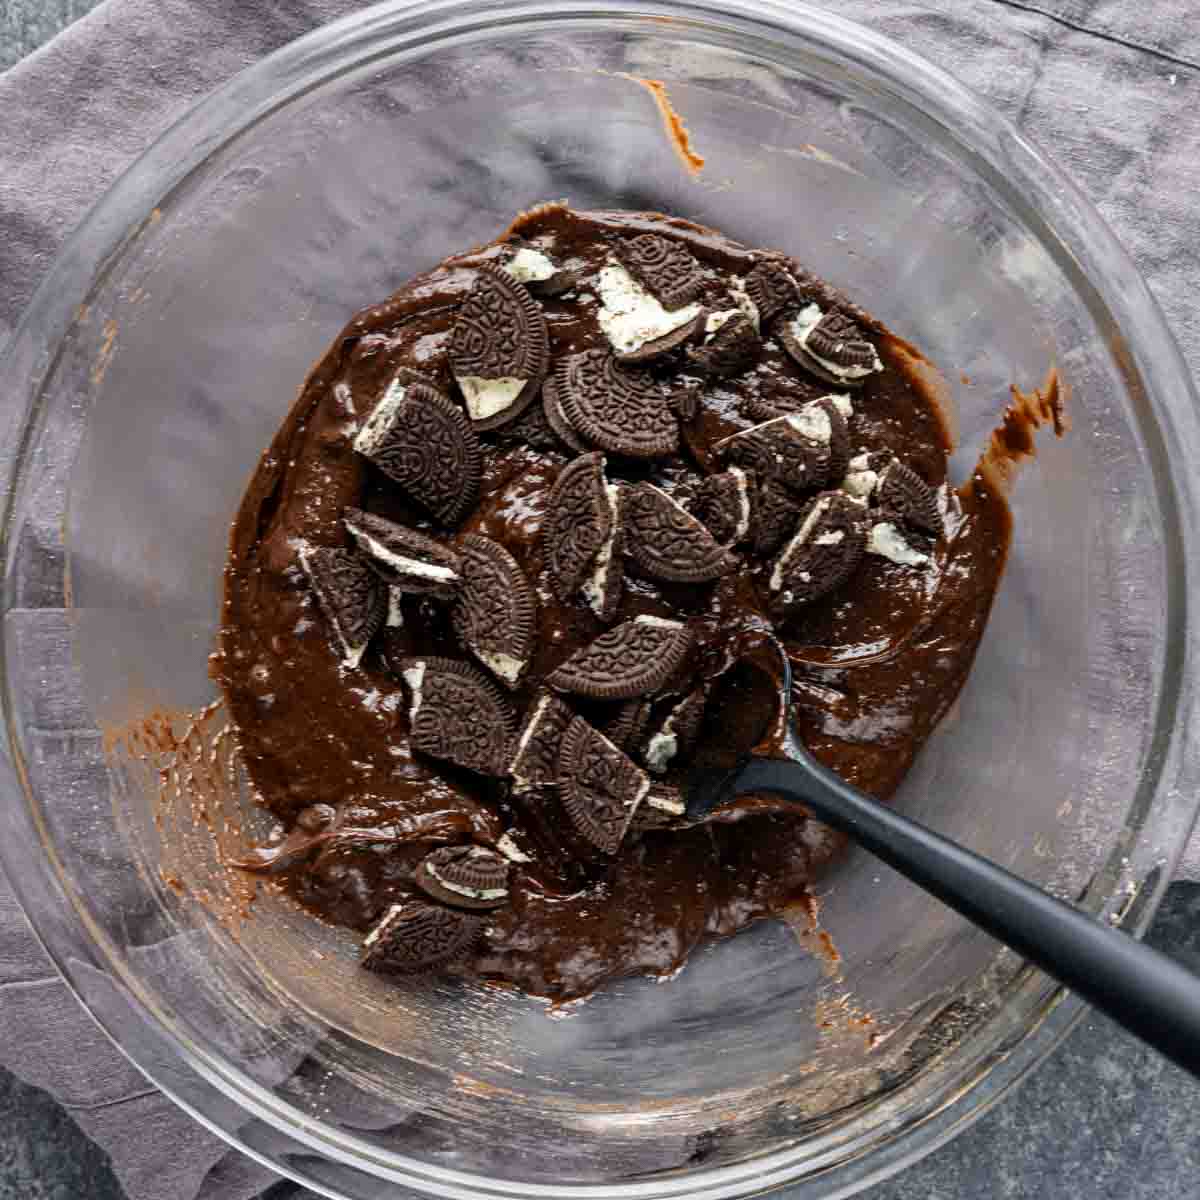 Oreo muffins batter in a bowl with a spoon.